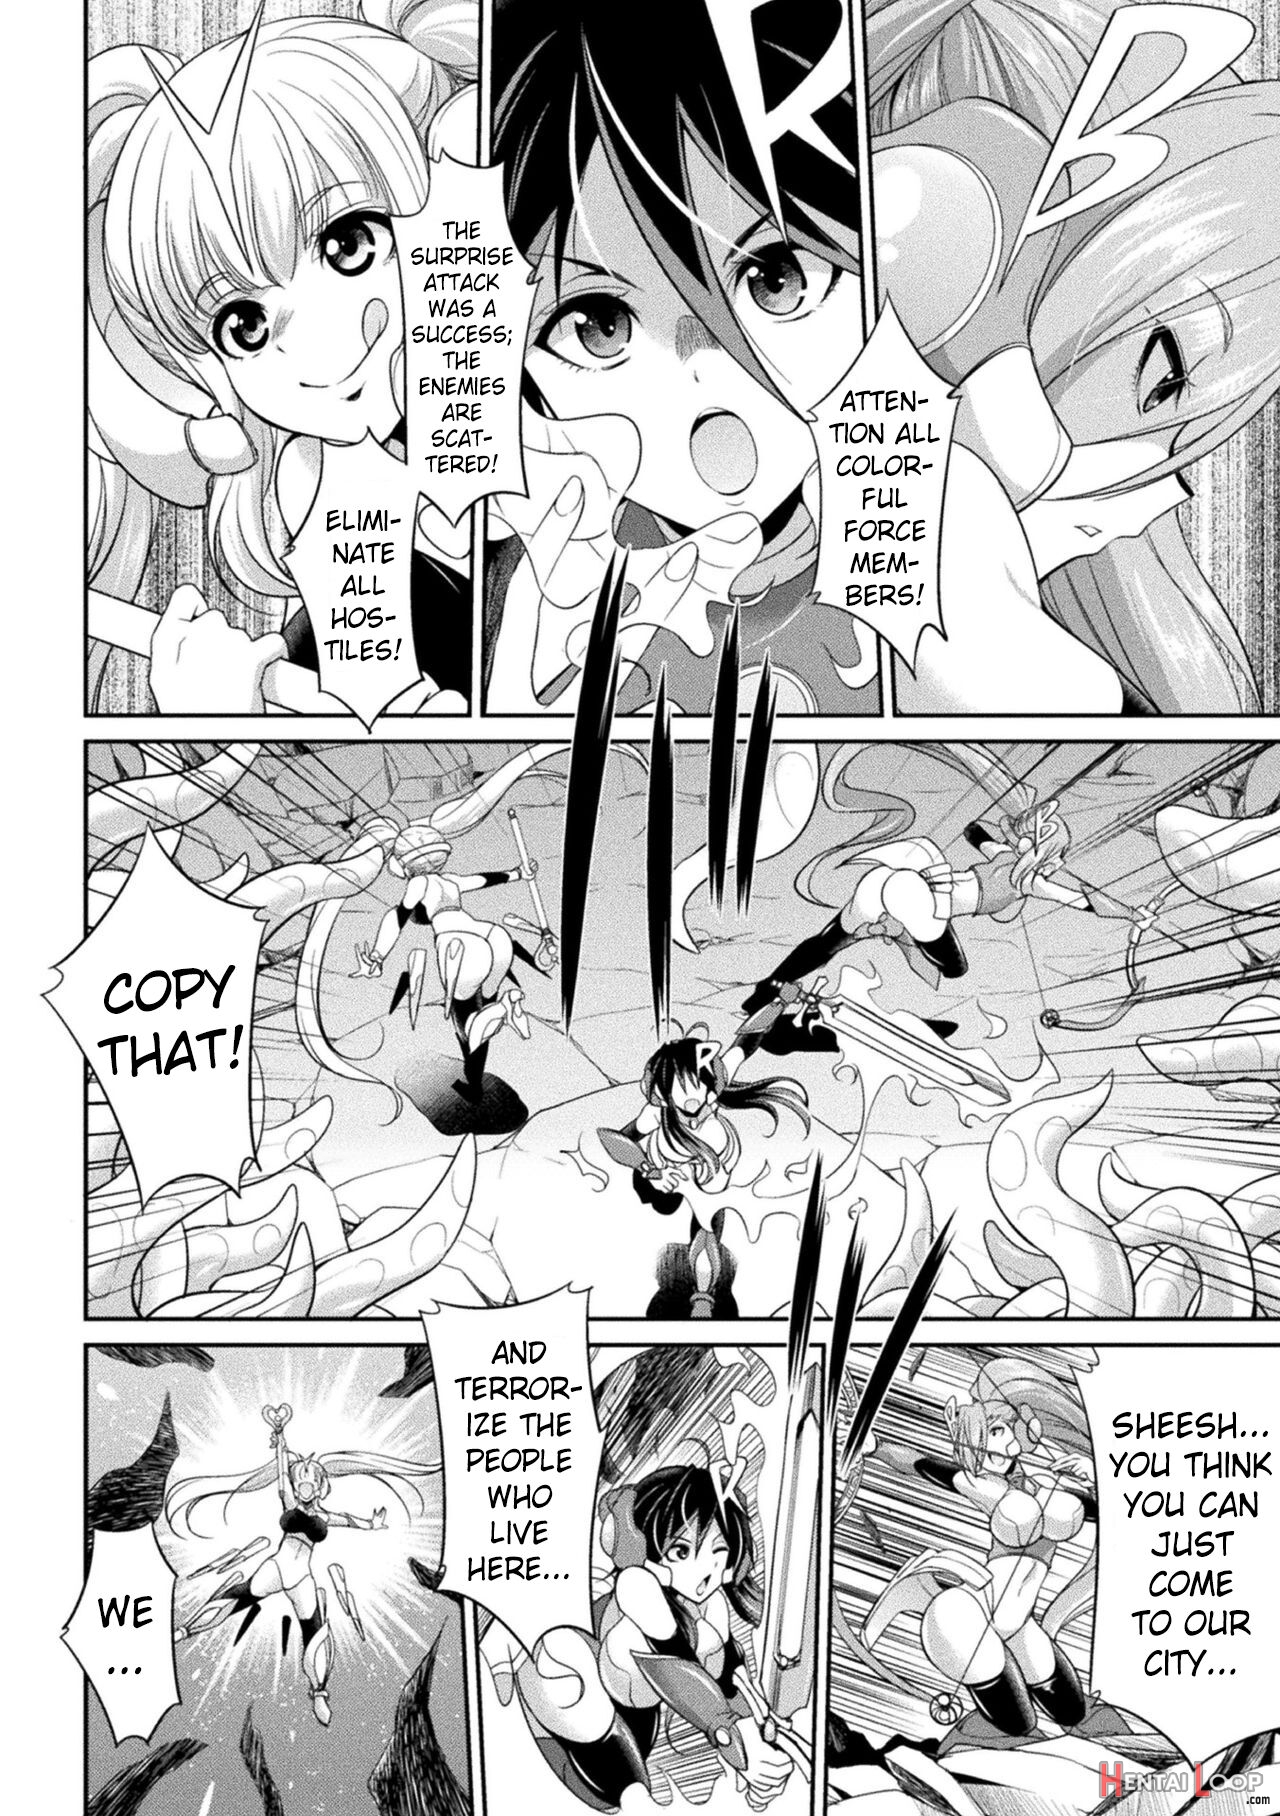 Special Duty Squadron Colorful Force Heroines Of Justice Vs The Tentacle Queen! The Great Battle Of Futa Training!? page 8